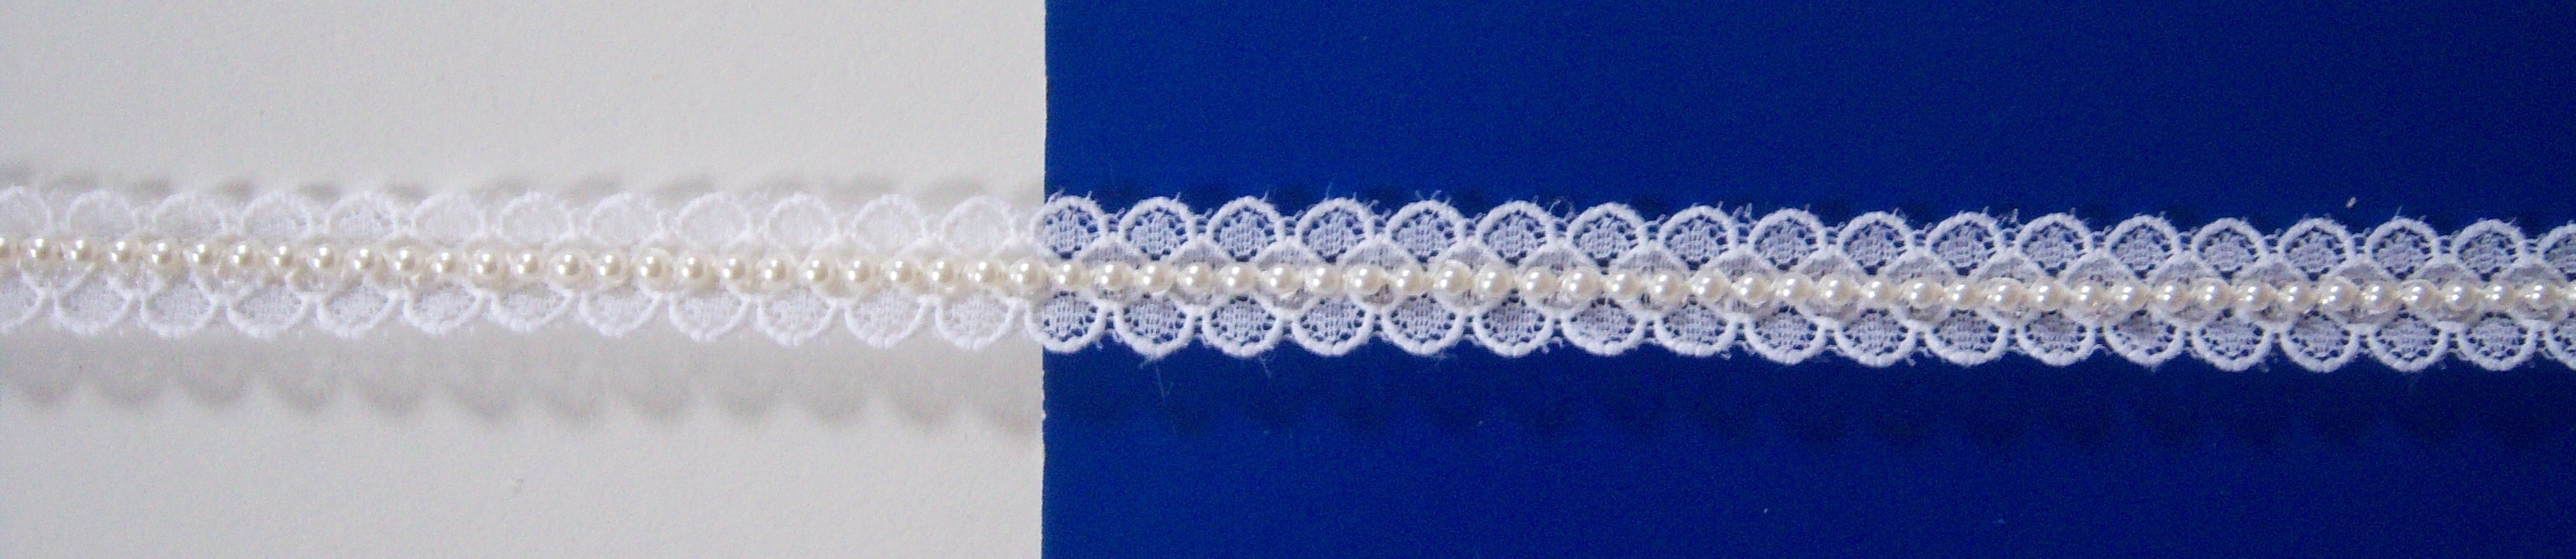 White Lace/Alabaster Pearls 1/2" Braid